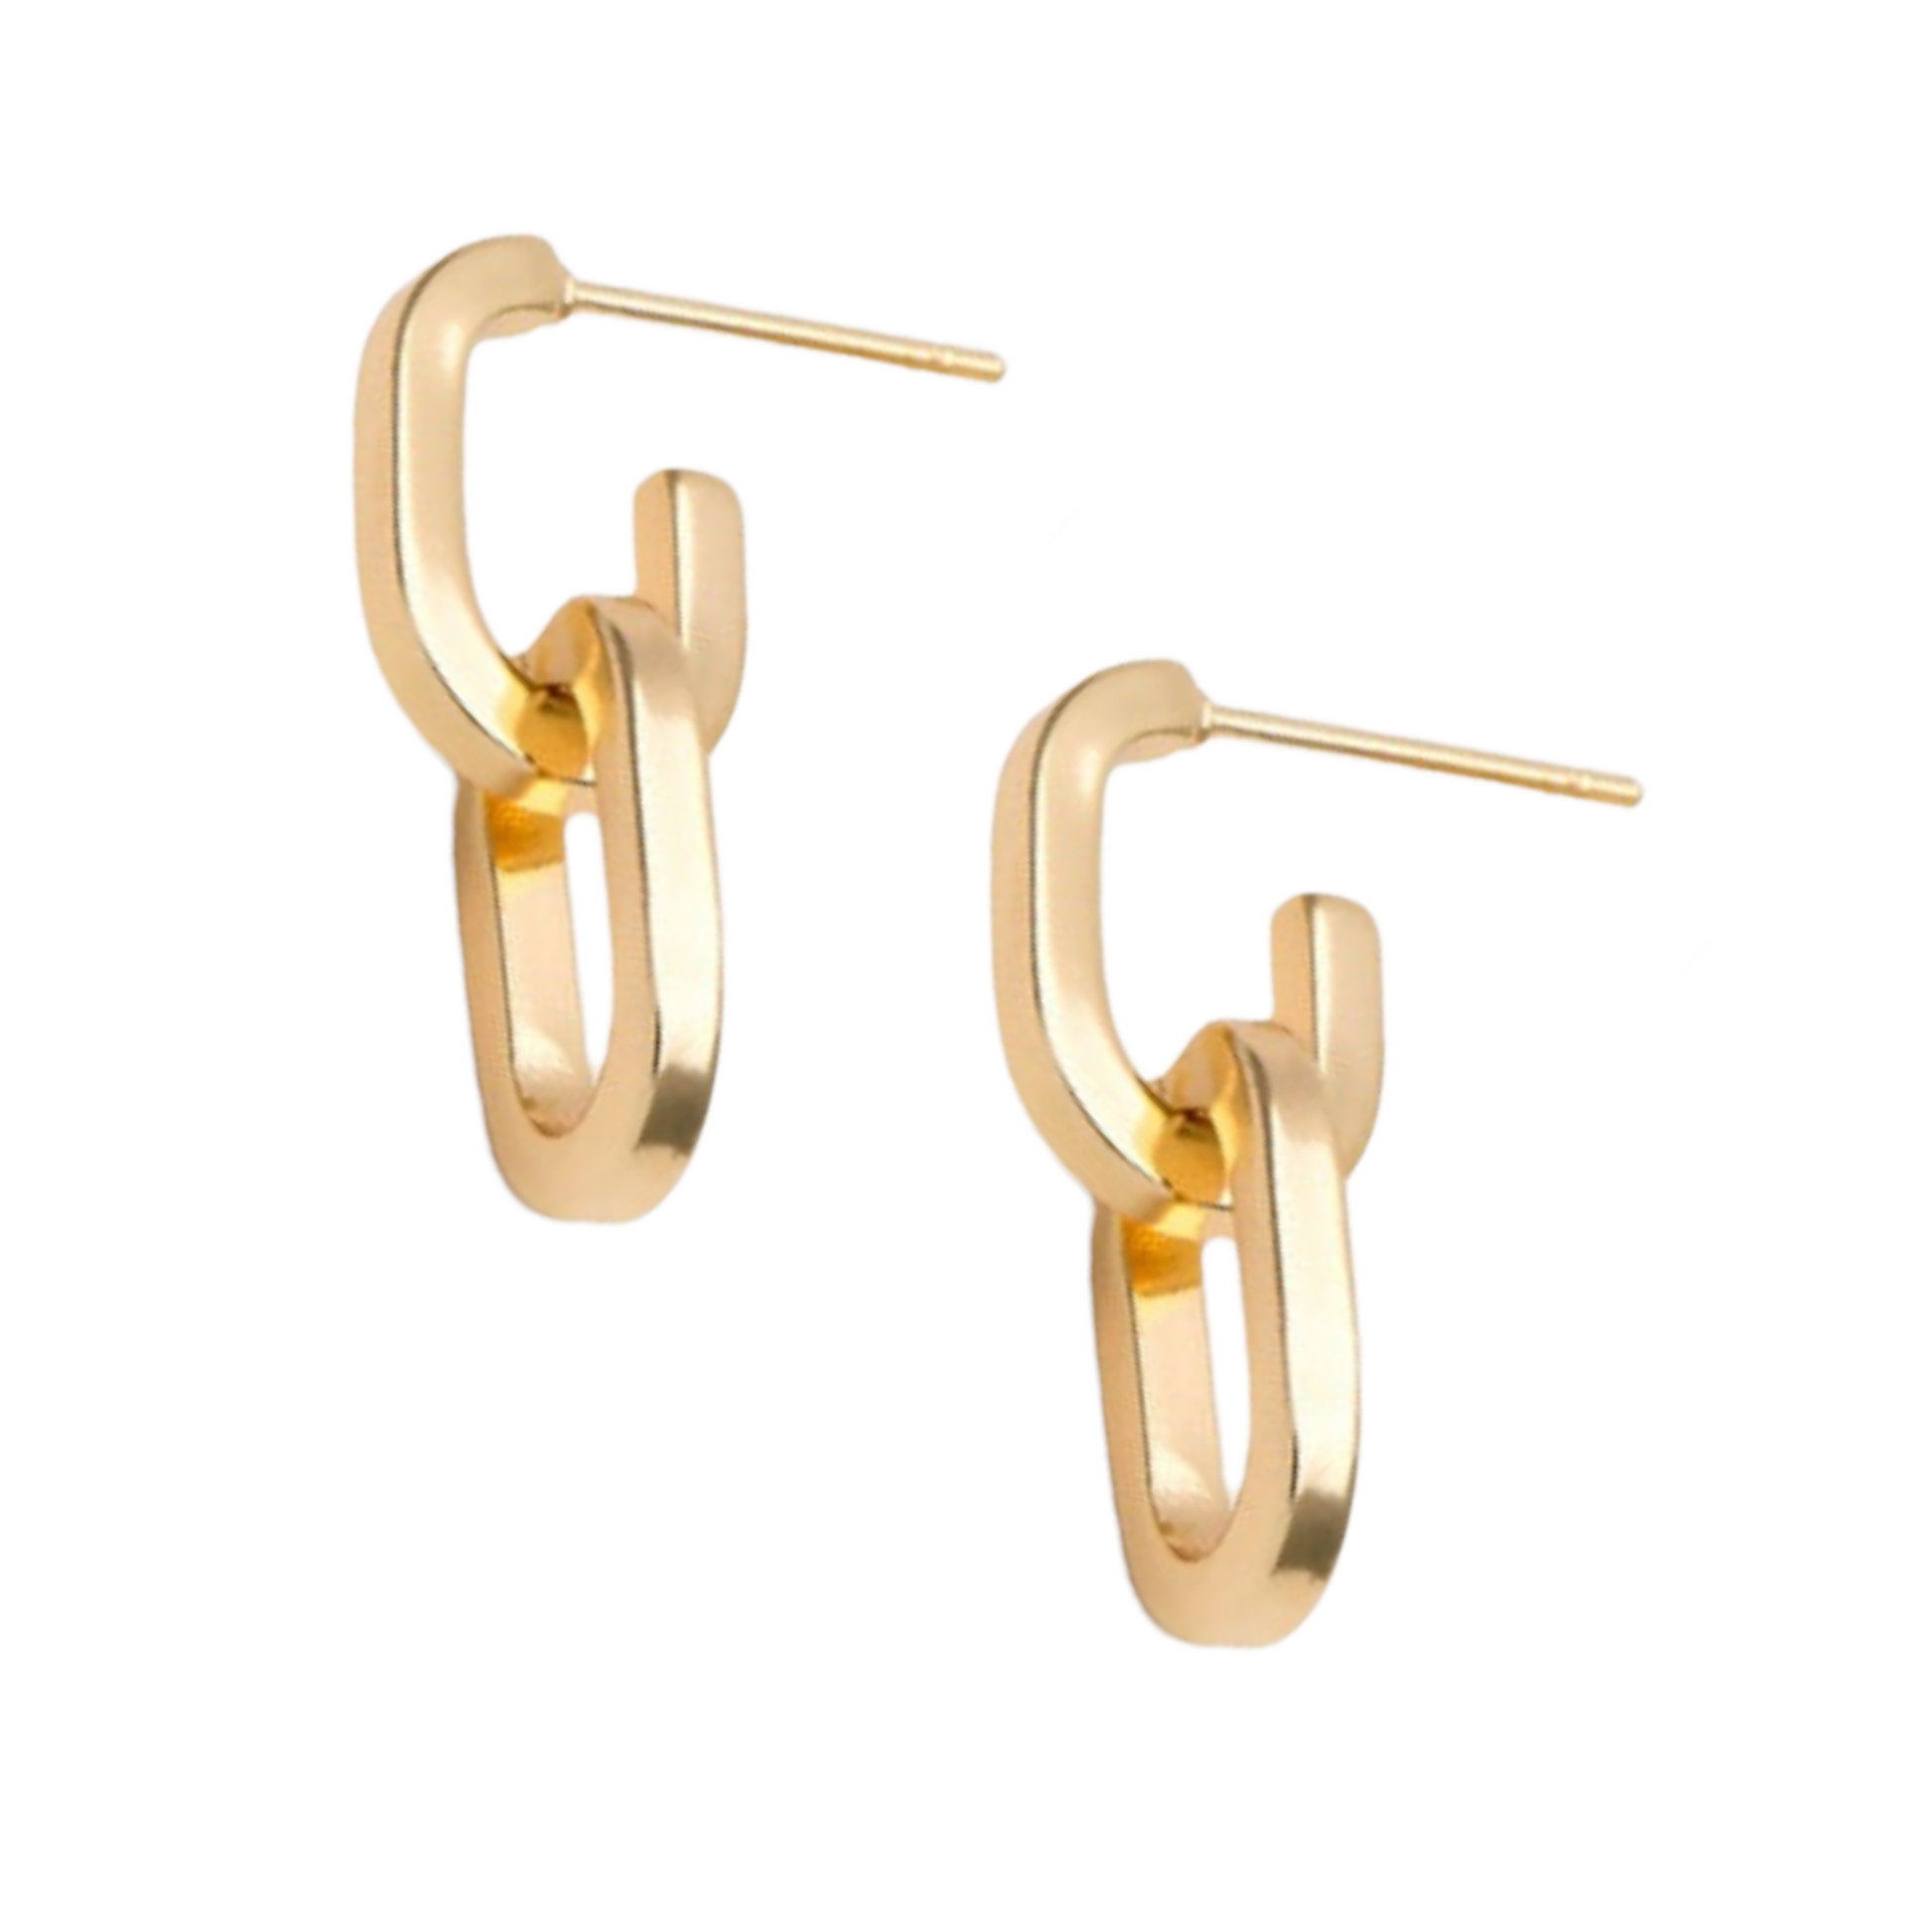 Gold Plated Chain Link Studs